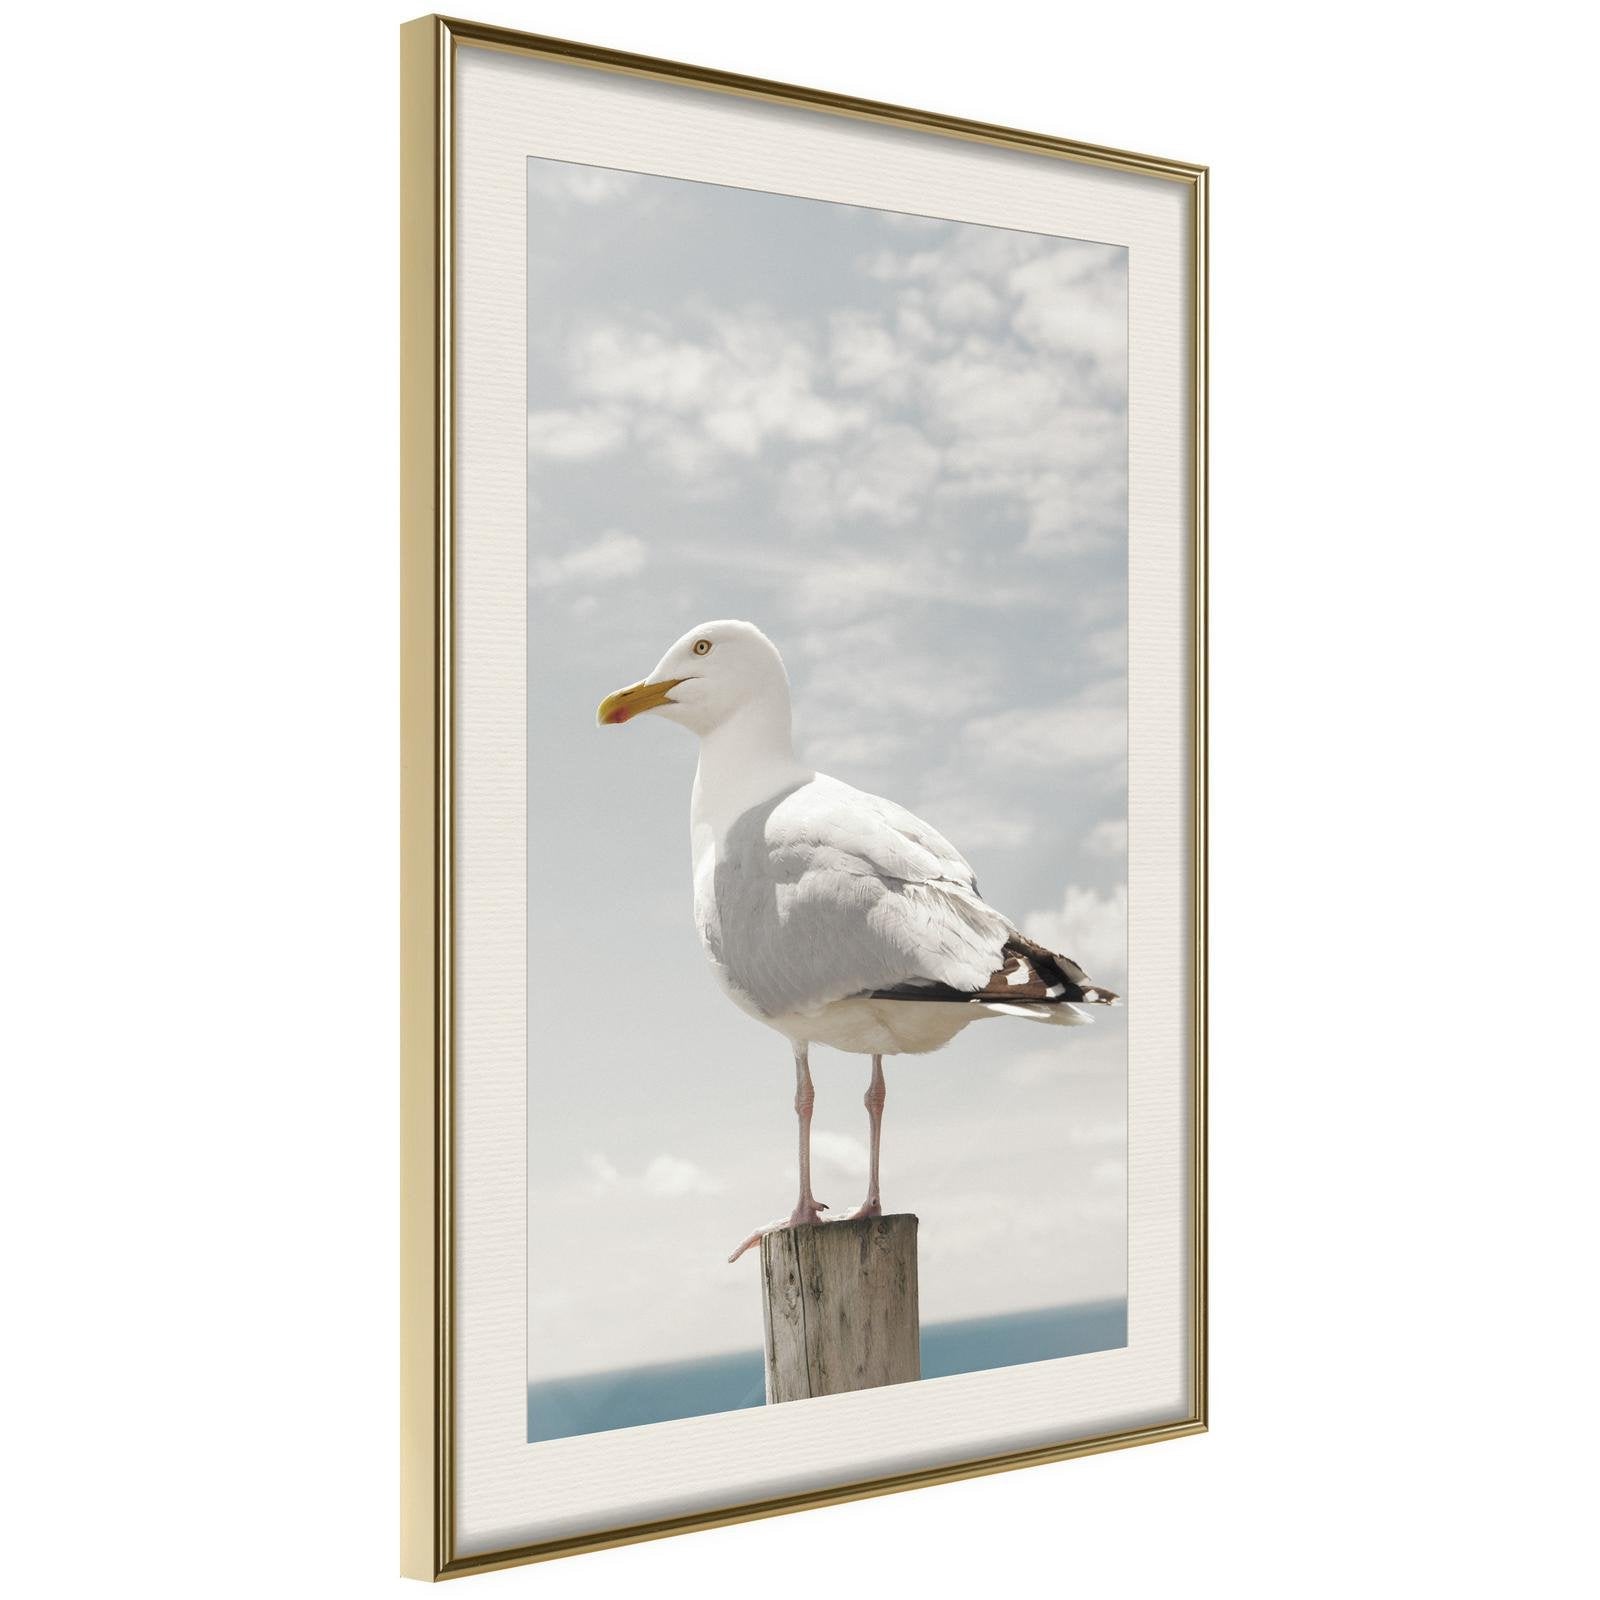 Inramad Poster / Tavla - Curious Seagull-Poster Inramad-Artgeist-20x30-Guldram med passepartout-peaceofhome.se